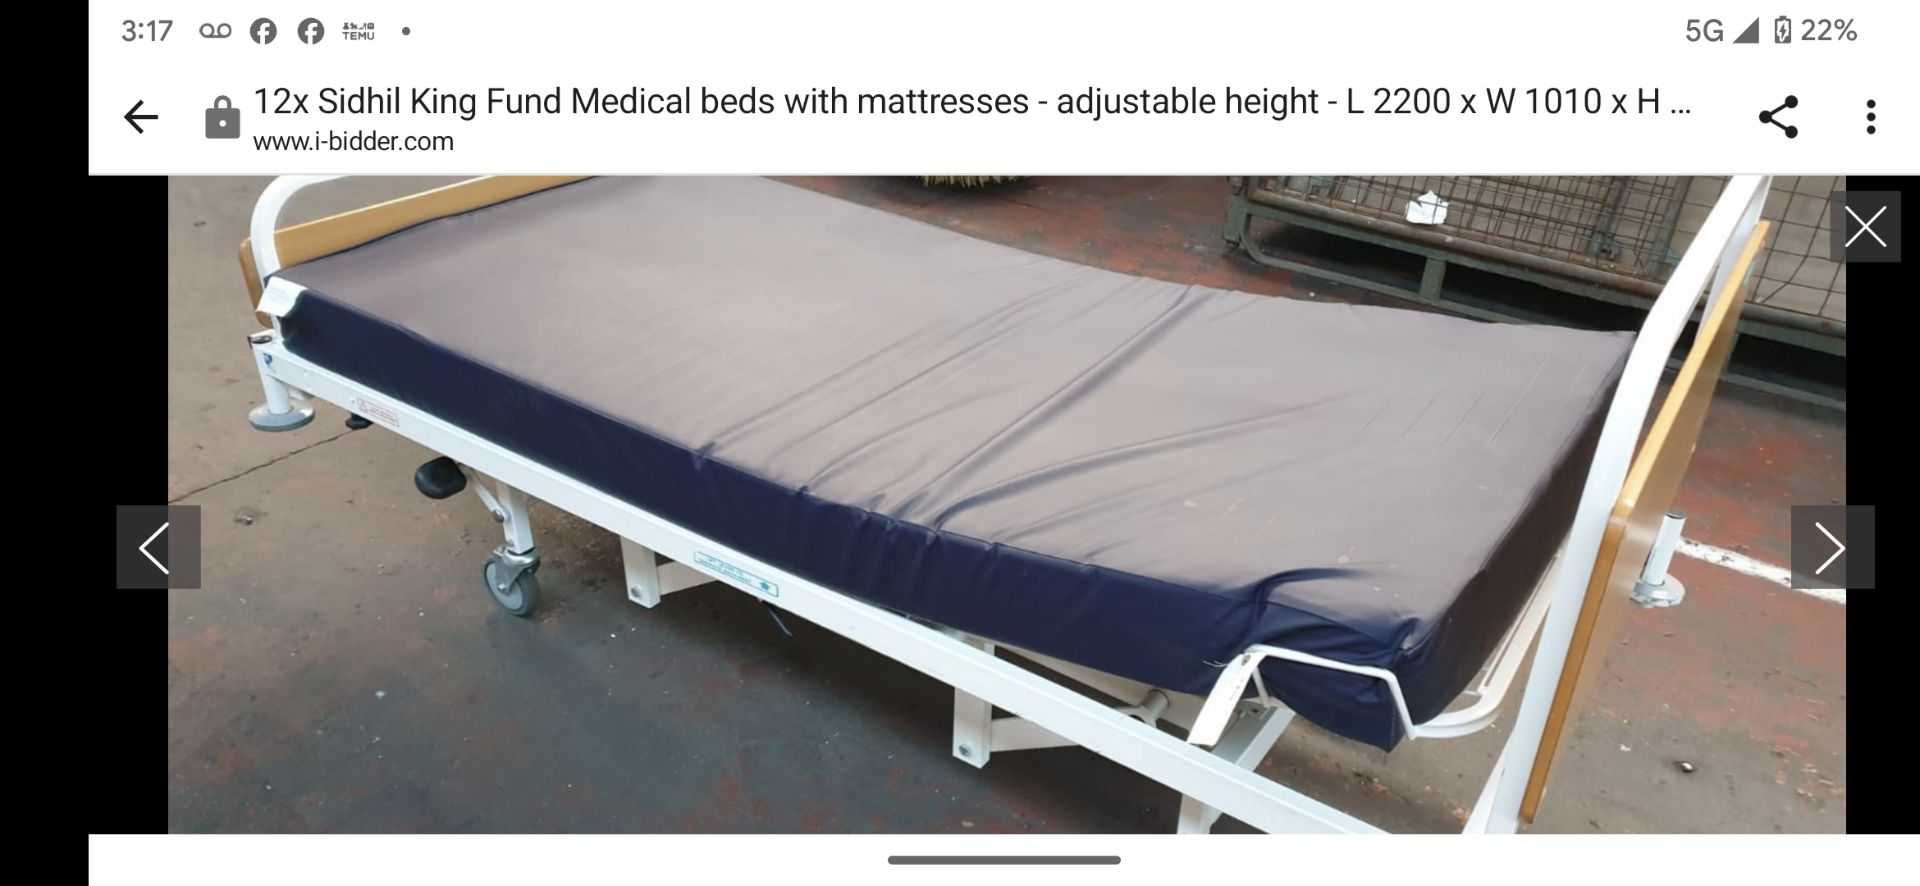 1 x Sidhil Kings Fund Hydraulic Hospital Bed With Mattress - Image 6 of 6